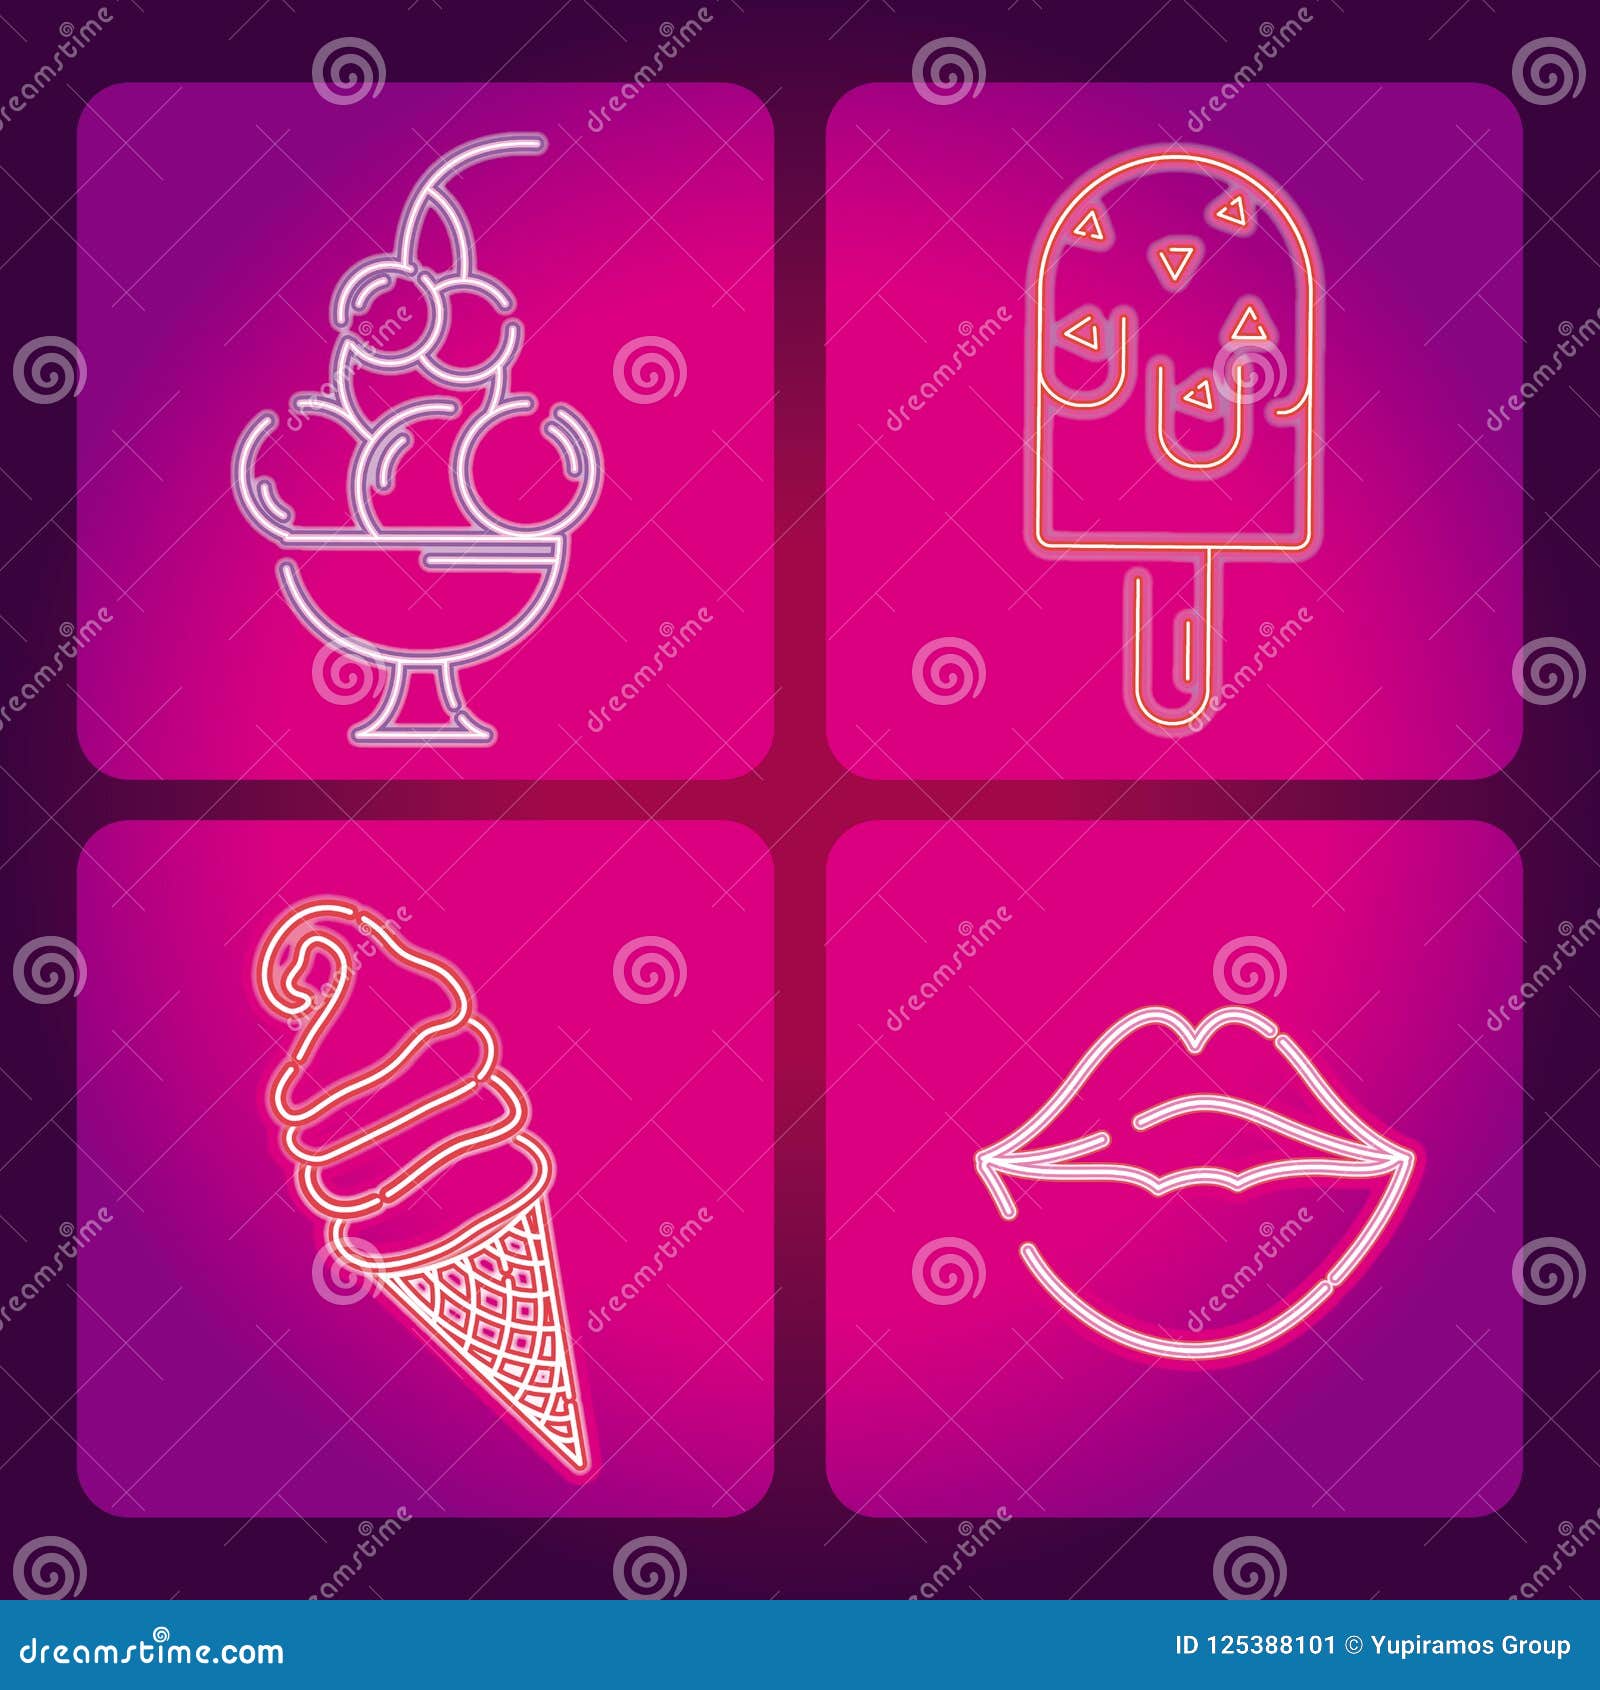 Set of food neon icons stock vector. Illustration of glow - 125388101